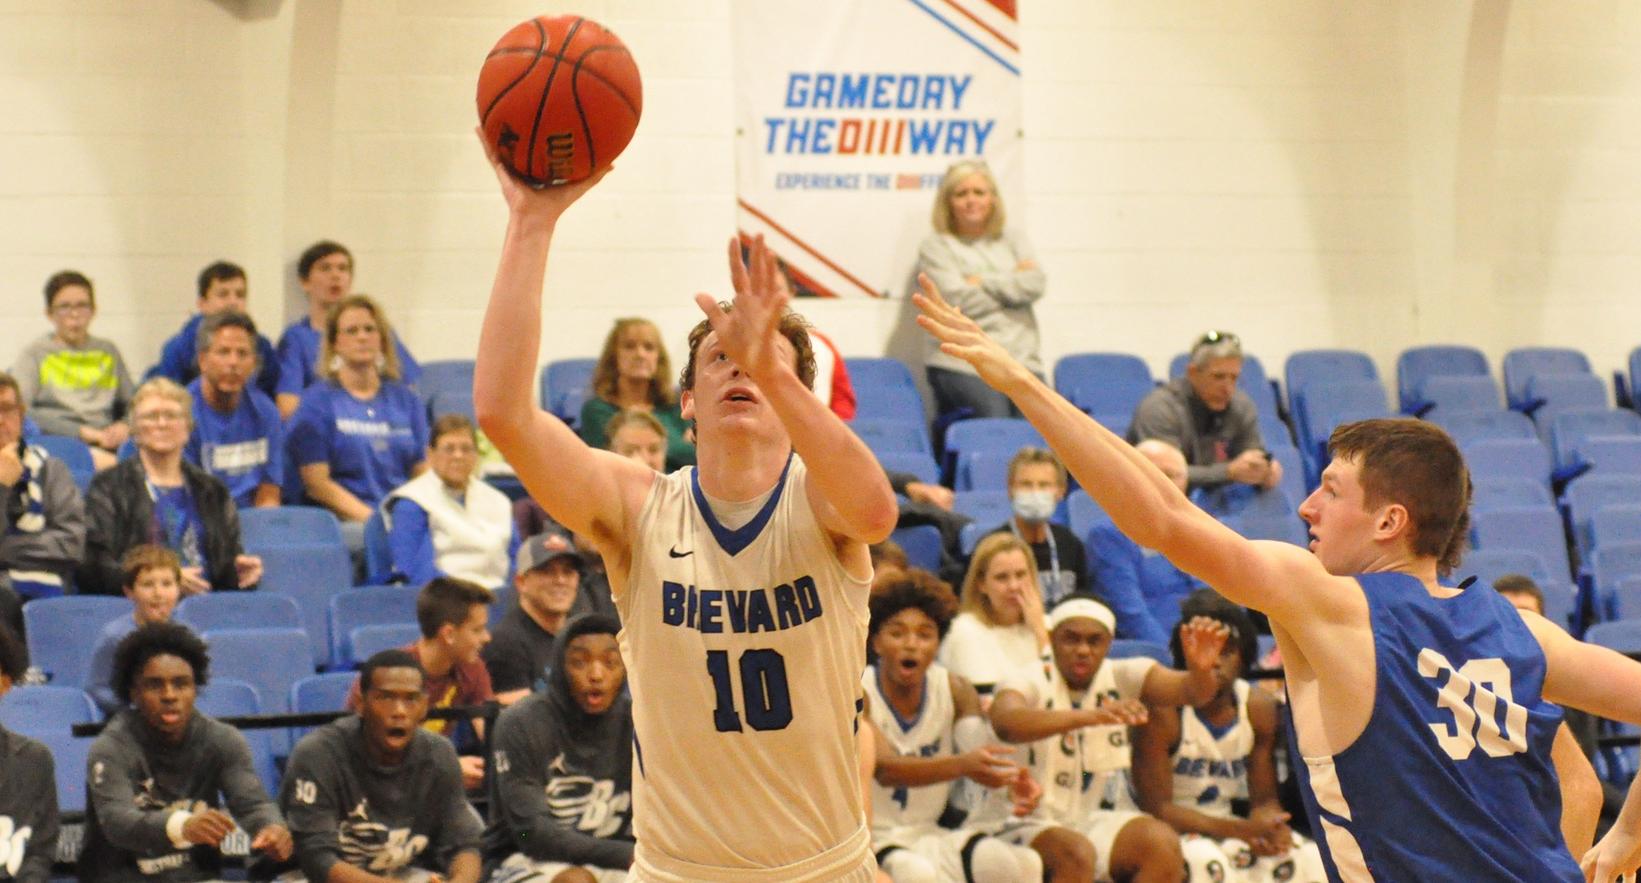 Junior forward Cannon Lamb poured in a career-high 21 points as the Brevard College men's basketball team claimed its first victory of 2019-20, 76-68, over Berea College (Photo courtesy of Tommy Moss).